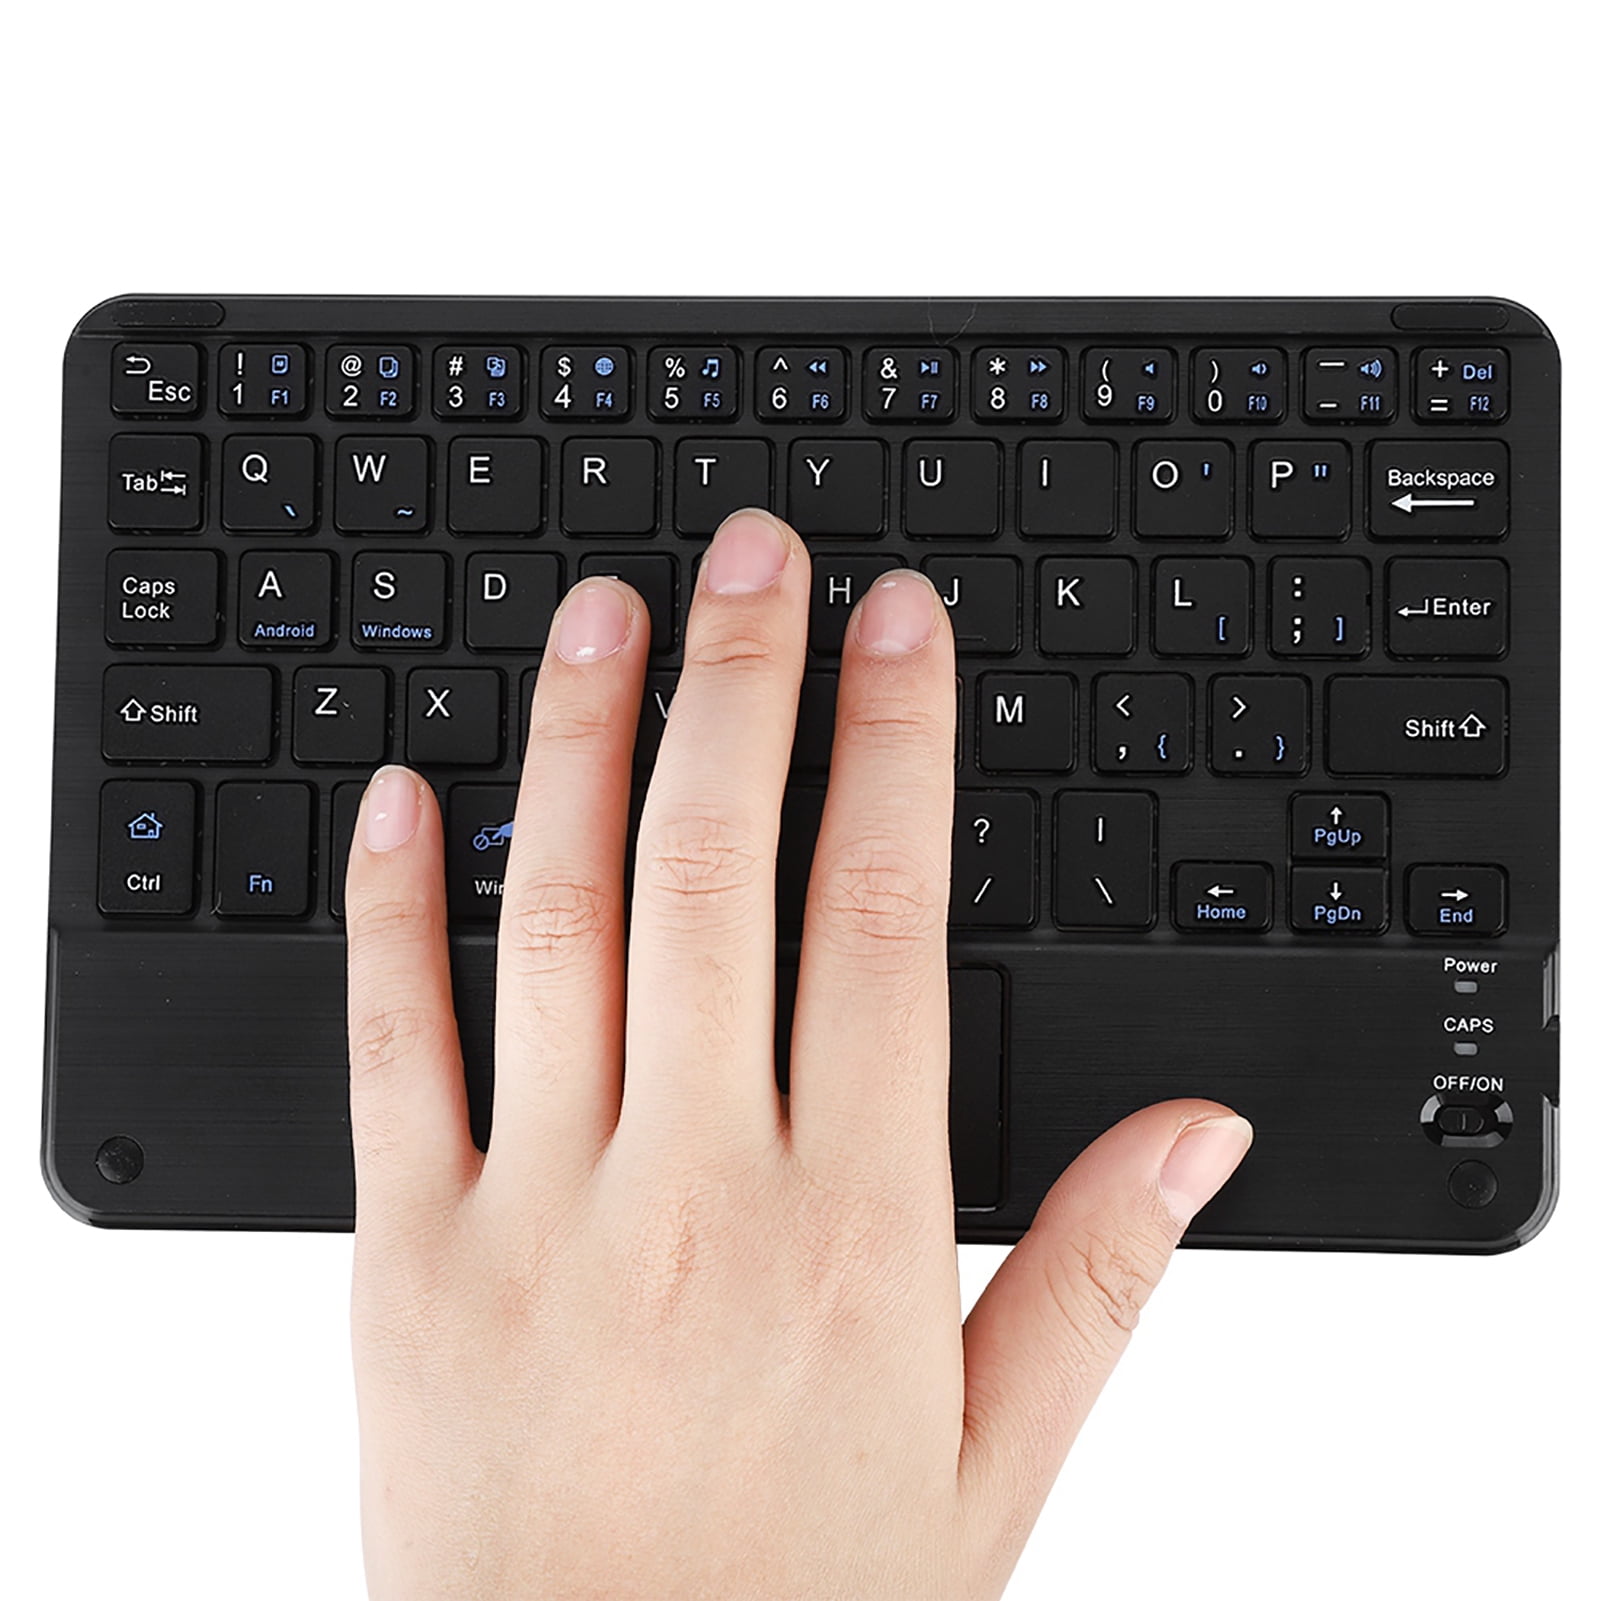 Mini Keyboard / 10 Systems Aluminum Alloy ABS Keyboard Wireless Keyboard Faster Type Keyboard Light and Convenient for